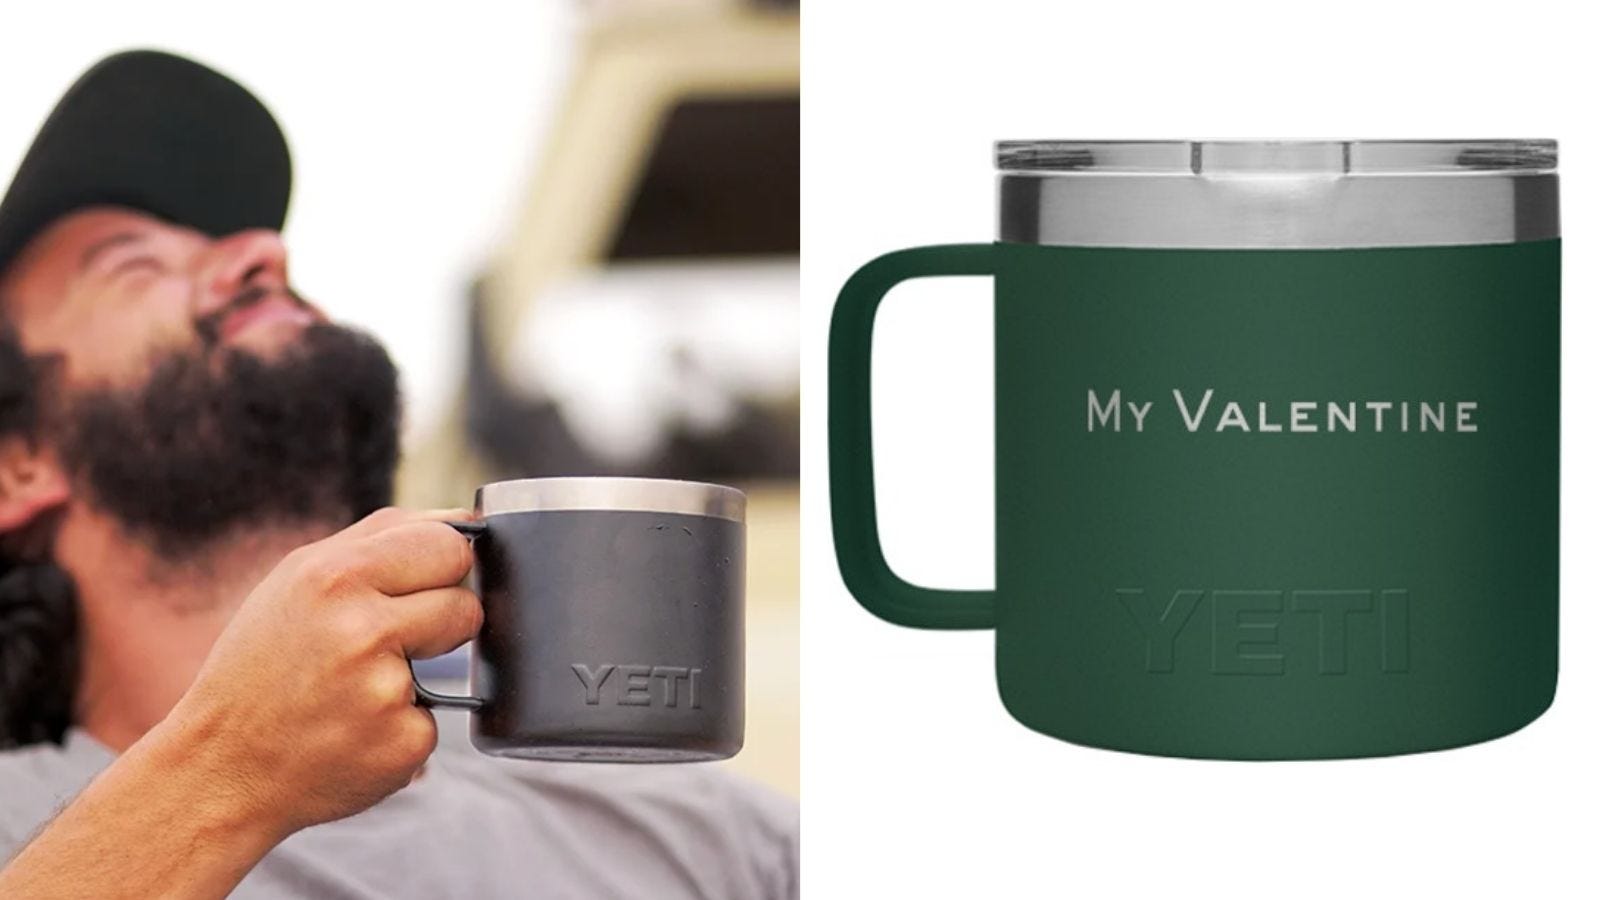 20 personalized Valentine's Day gifts anyone would love this year